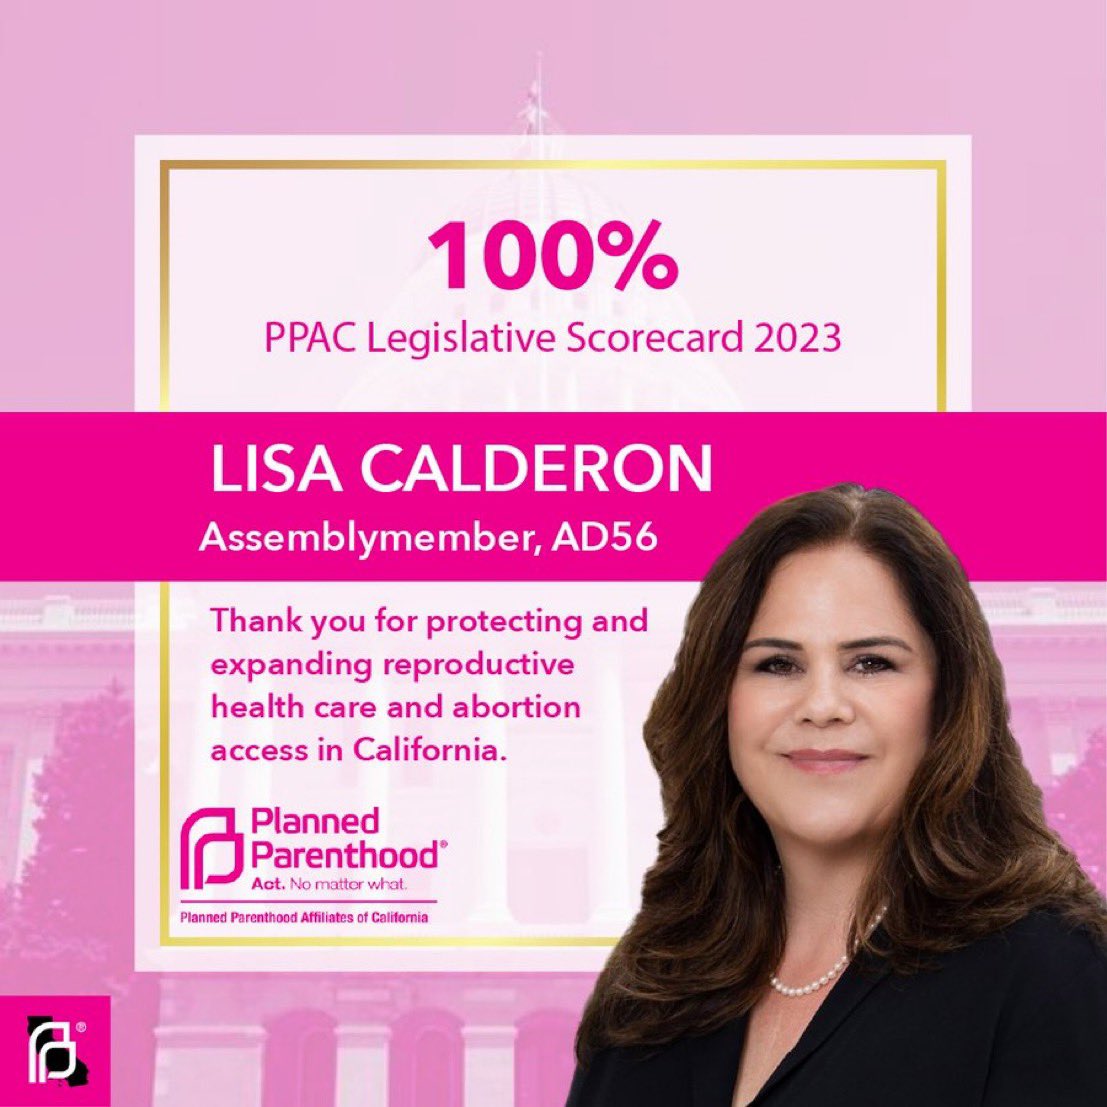 I'm pleased to announce that I received a 100% score on the @PPActionCA 2023 Legislative Scorecard! I look forward to continuing to advocate for women’s healthcare in California!